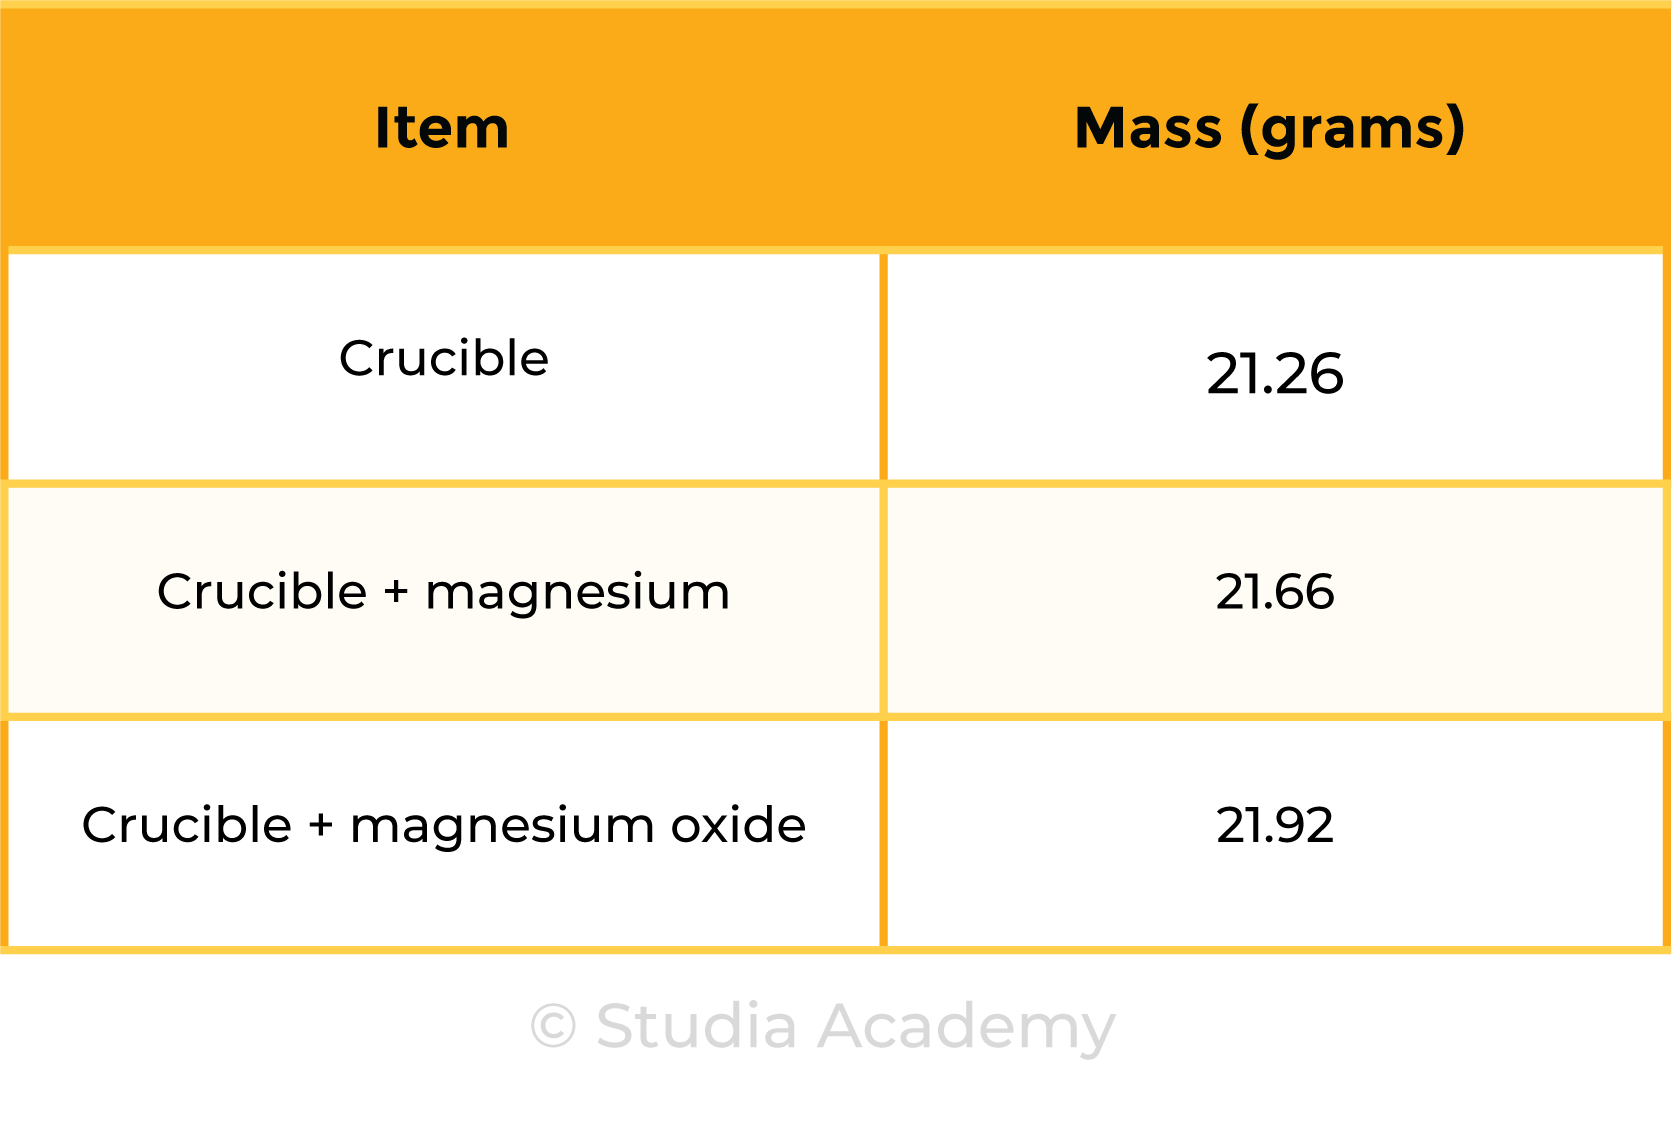 edexcel_igcse_chemistry_topic 05 tables_chemical formulae, equations, and calculations_002_MgO combustion data values